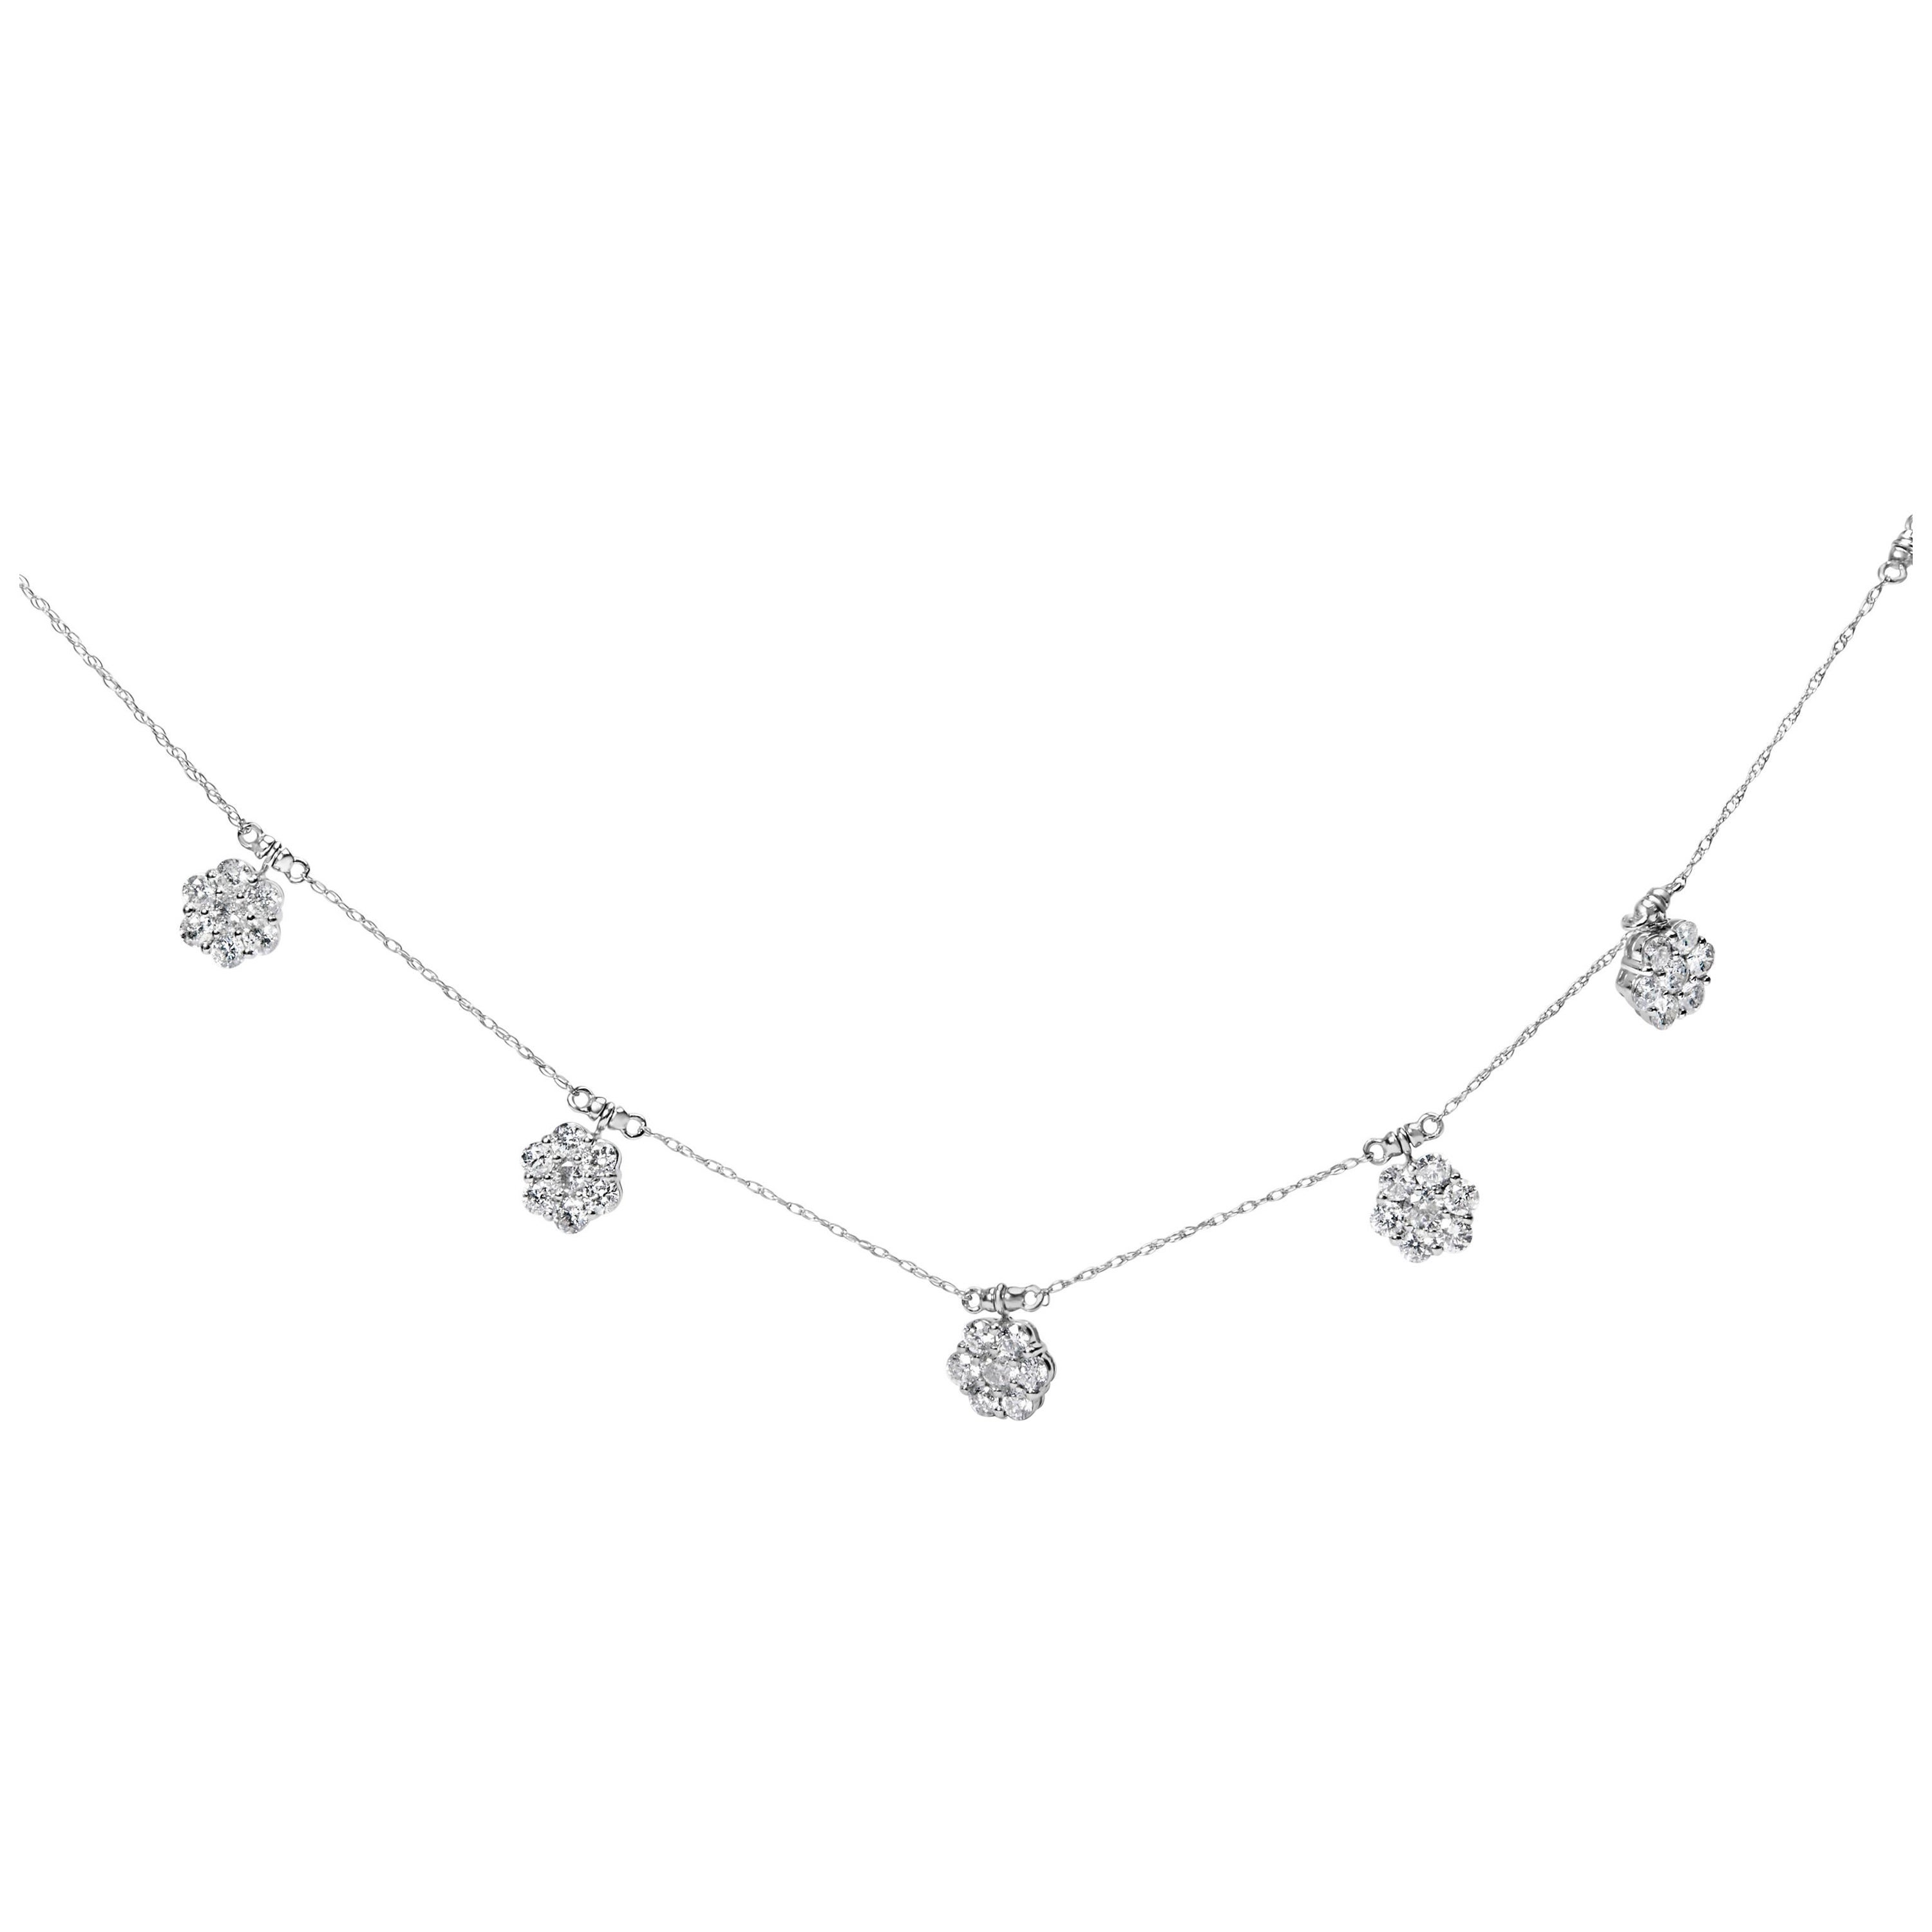 10K White Gold 3.0 Cttw Round-Cut Diamond 7 Stone Cluster Station Necklace